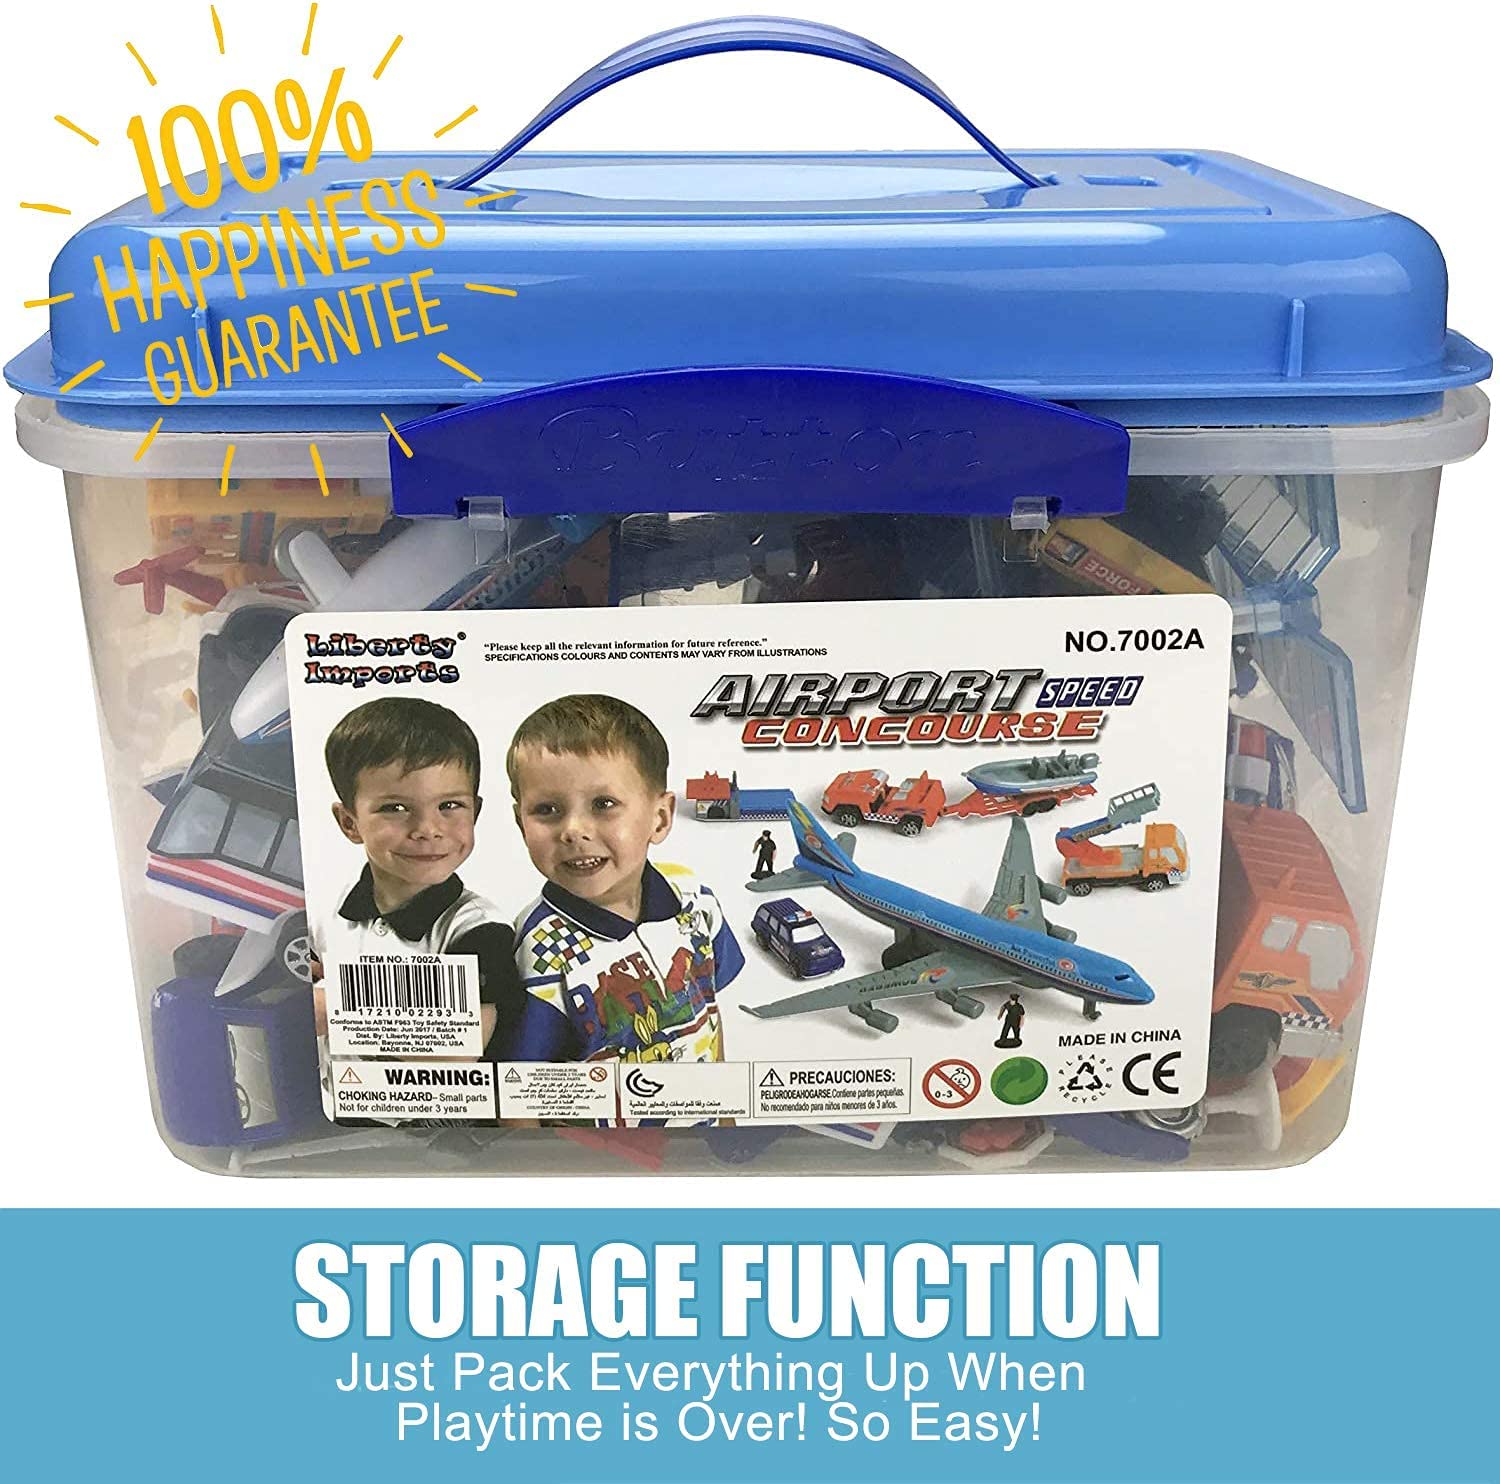 Liberty Imports Deluxe 57-Piece Kids Commercial Airport Playset in Storage Bucket with Airplane Toy, Play Vehicles, Fire Trucks, Police Cars & Figures, and Accessories